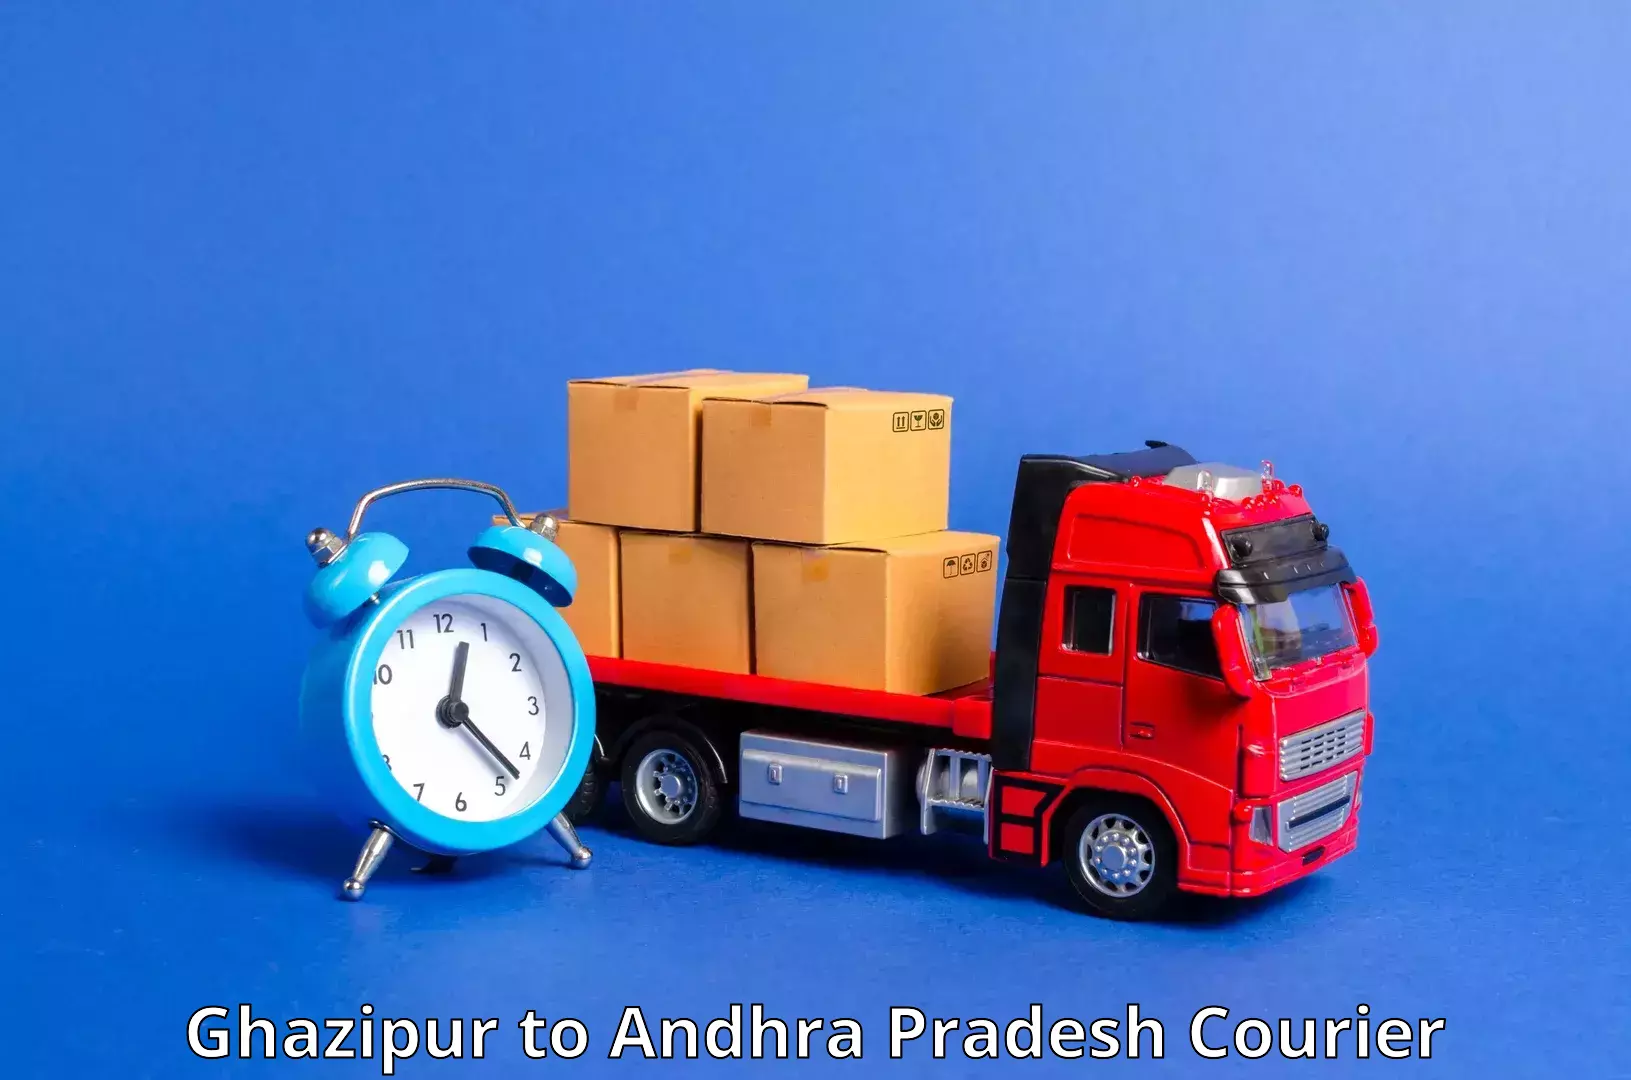 Local delivery service Ghazipur to Andhra Pradesh